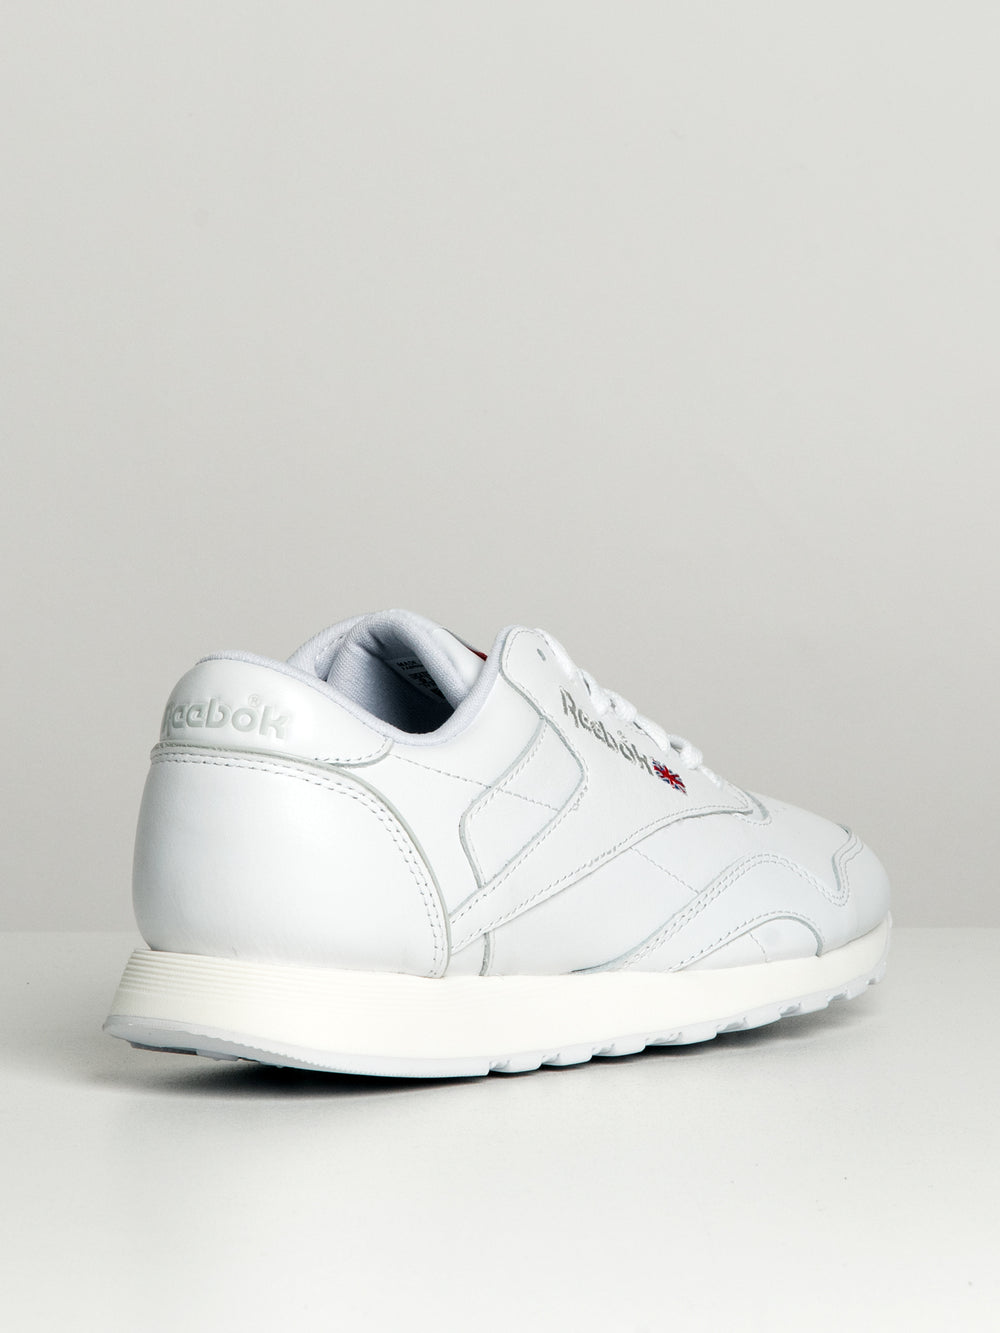 MENS REEBOK CLASSIC LEATHER PLUS - CLEARANCE